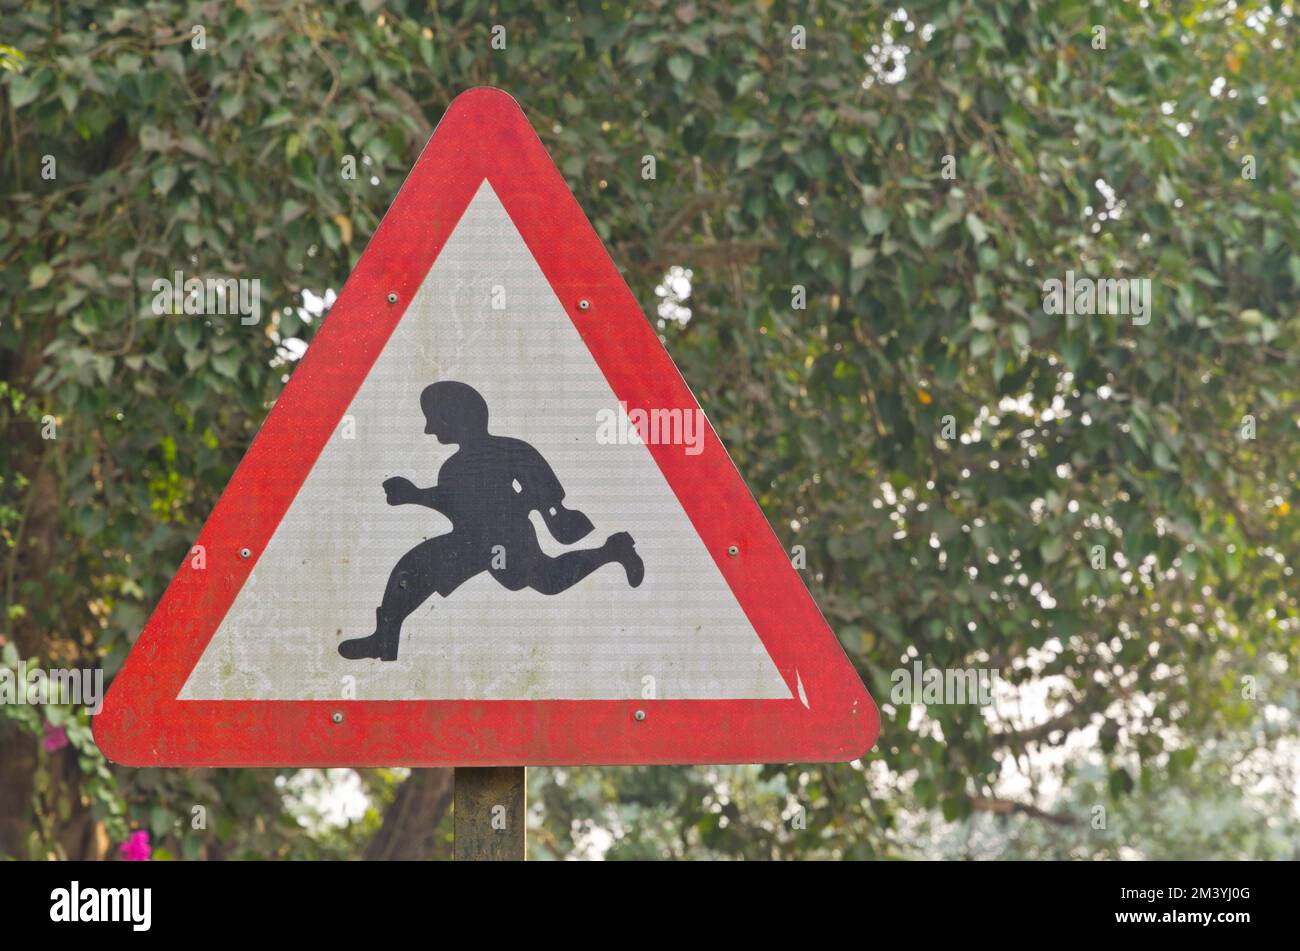 Traffic sign showing a running person, advice how to cross the road Stock Photo